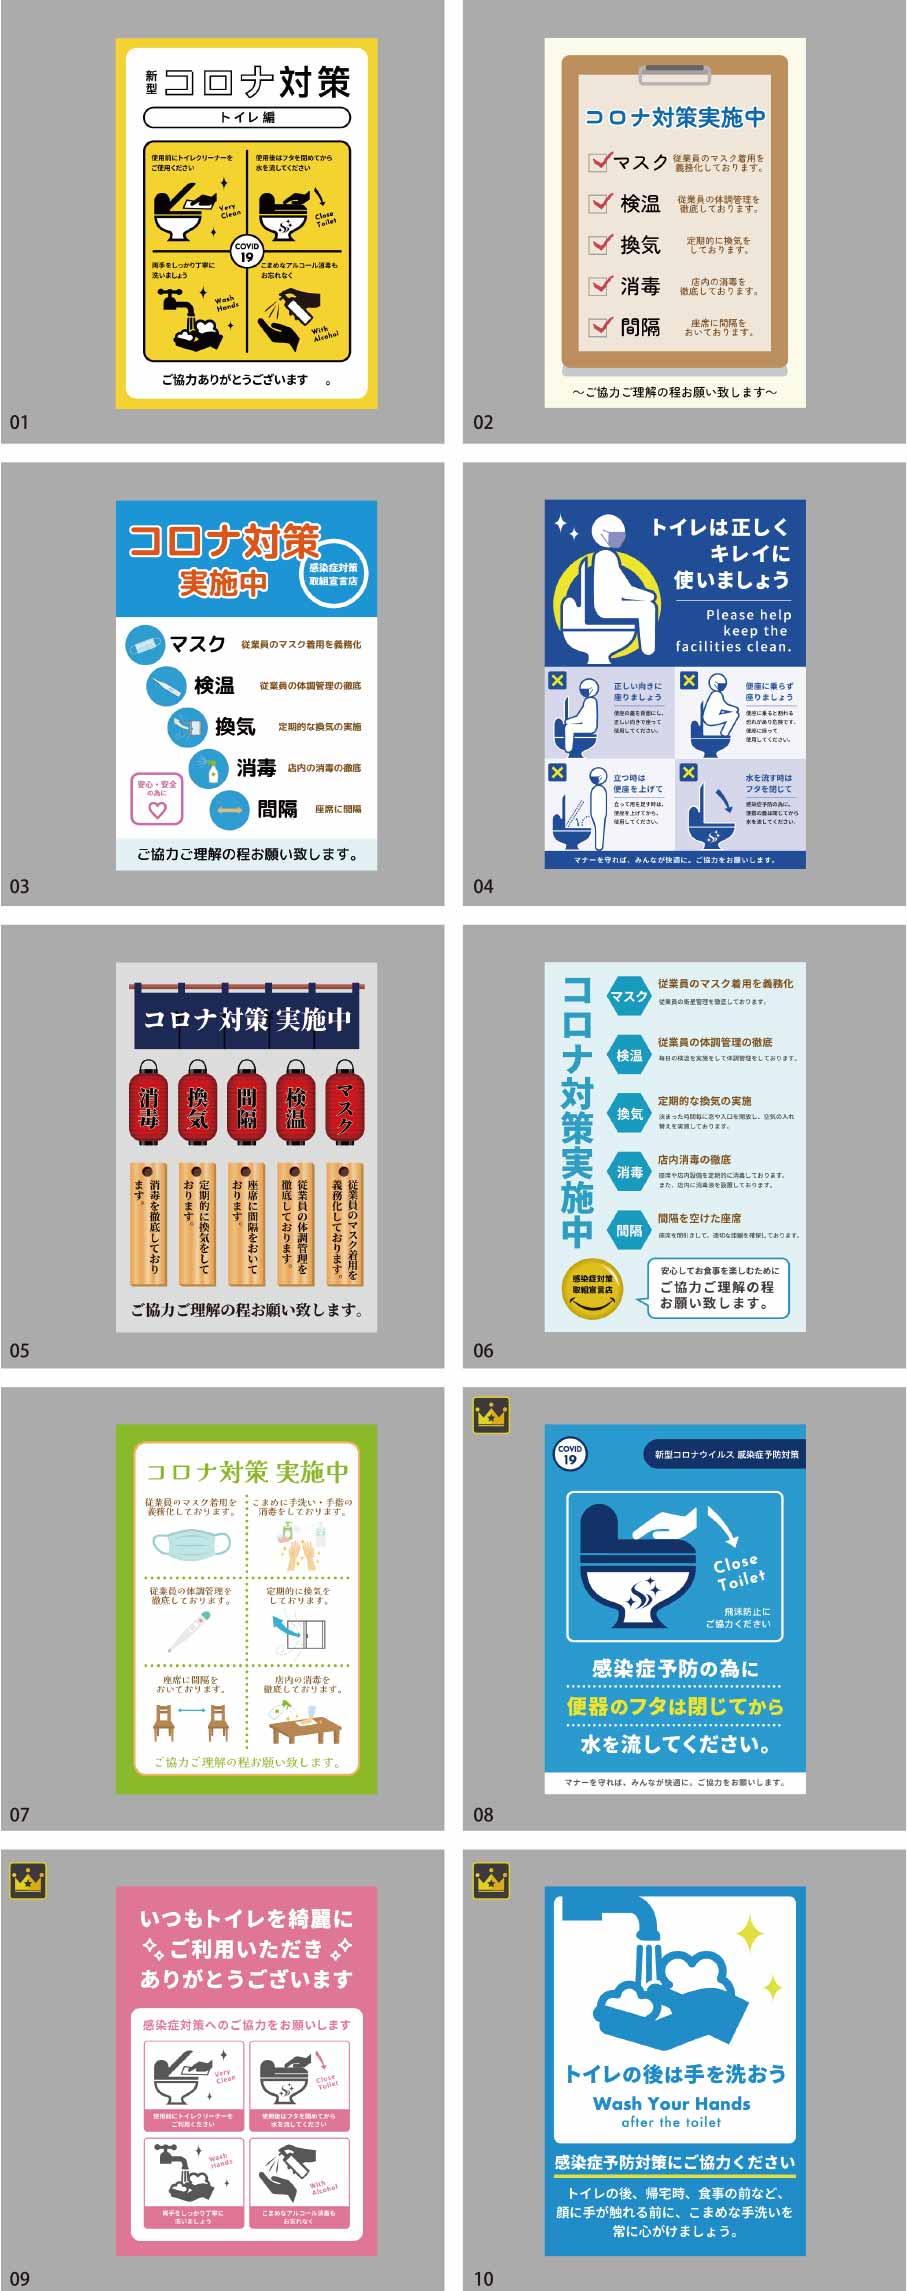 Infectious disease control flyer template